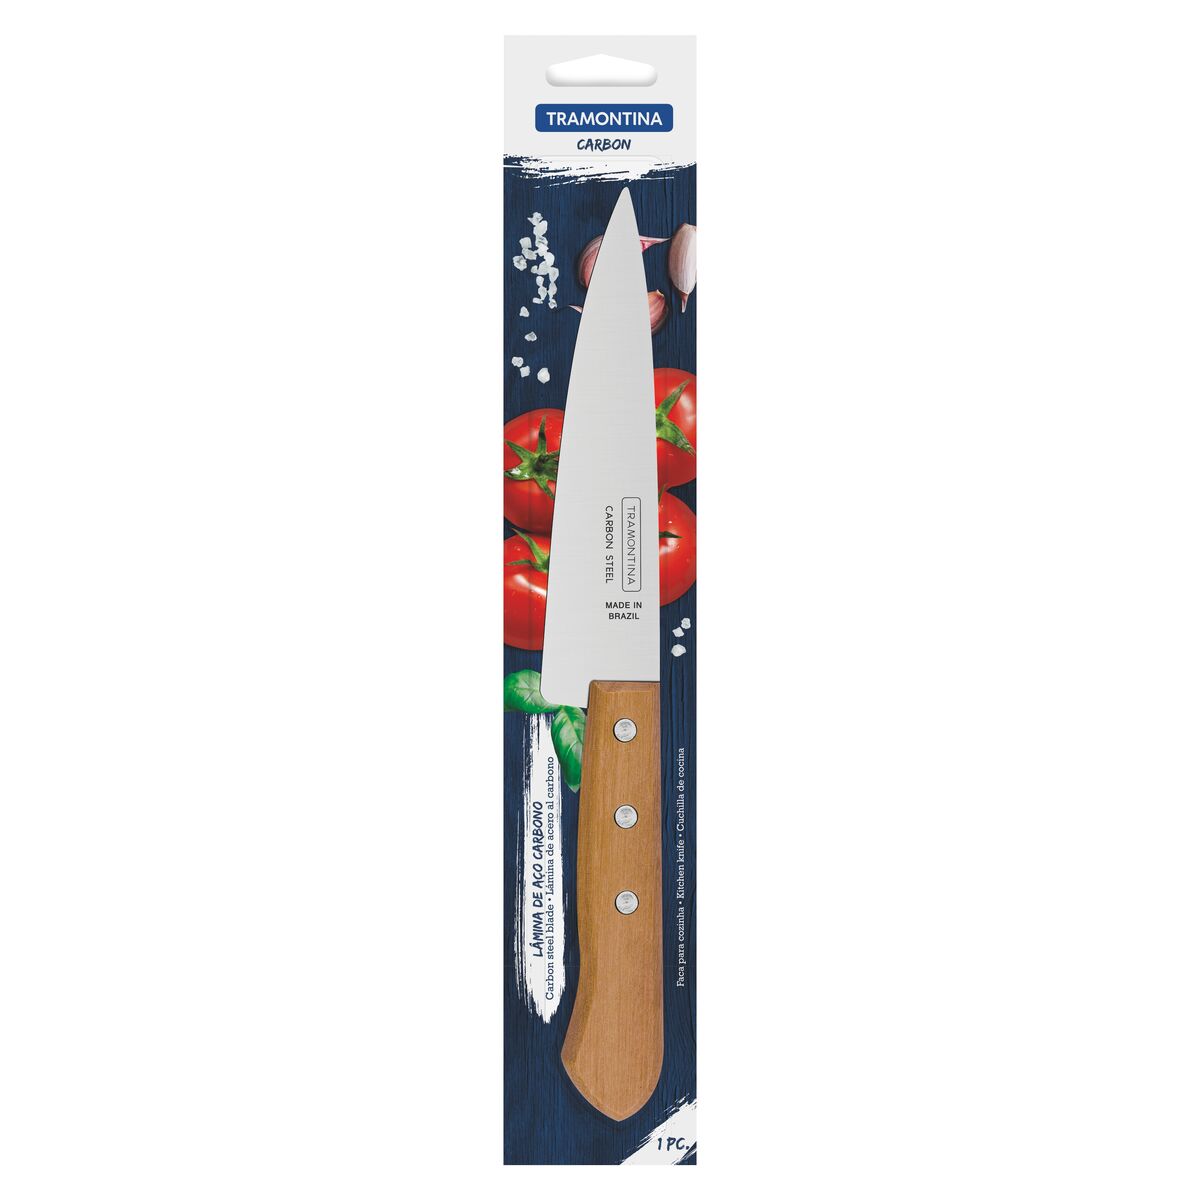 Tramontina 6" Cooks Knife Carbon - 22950/106